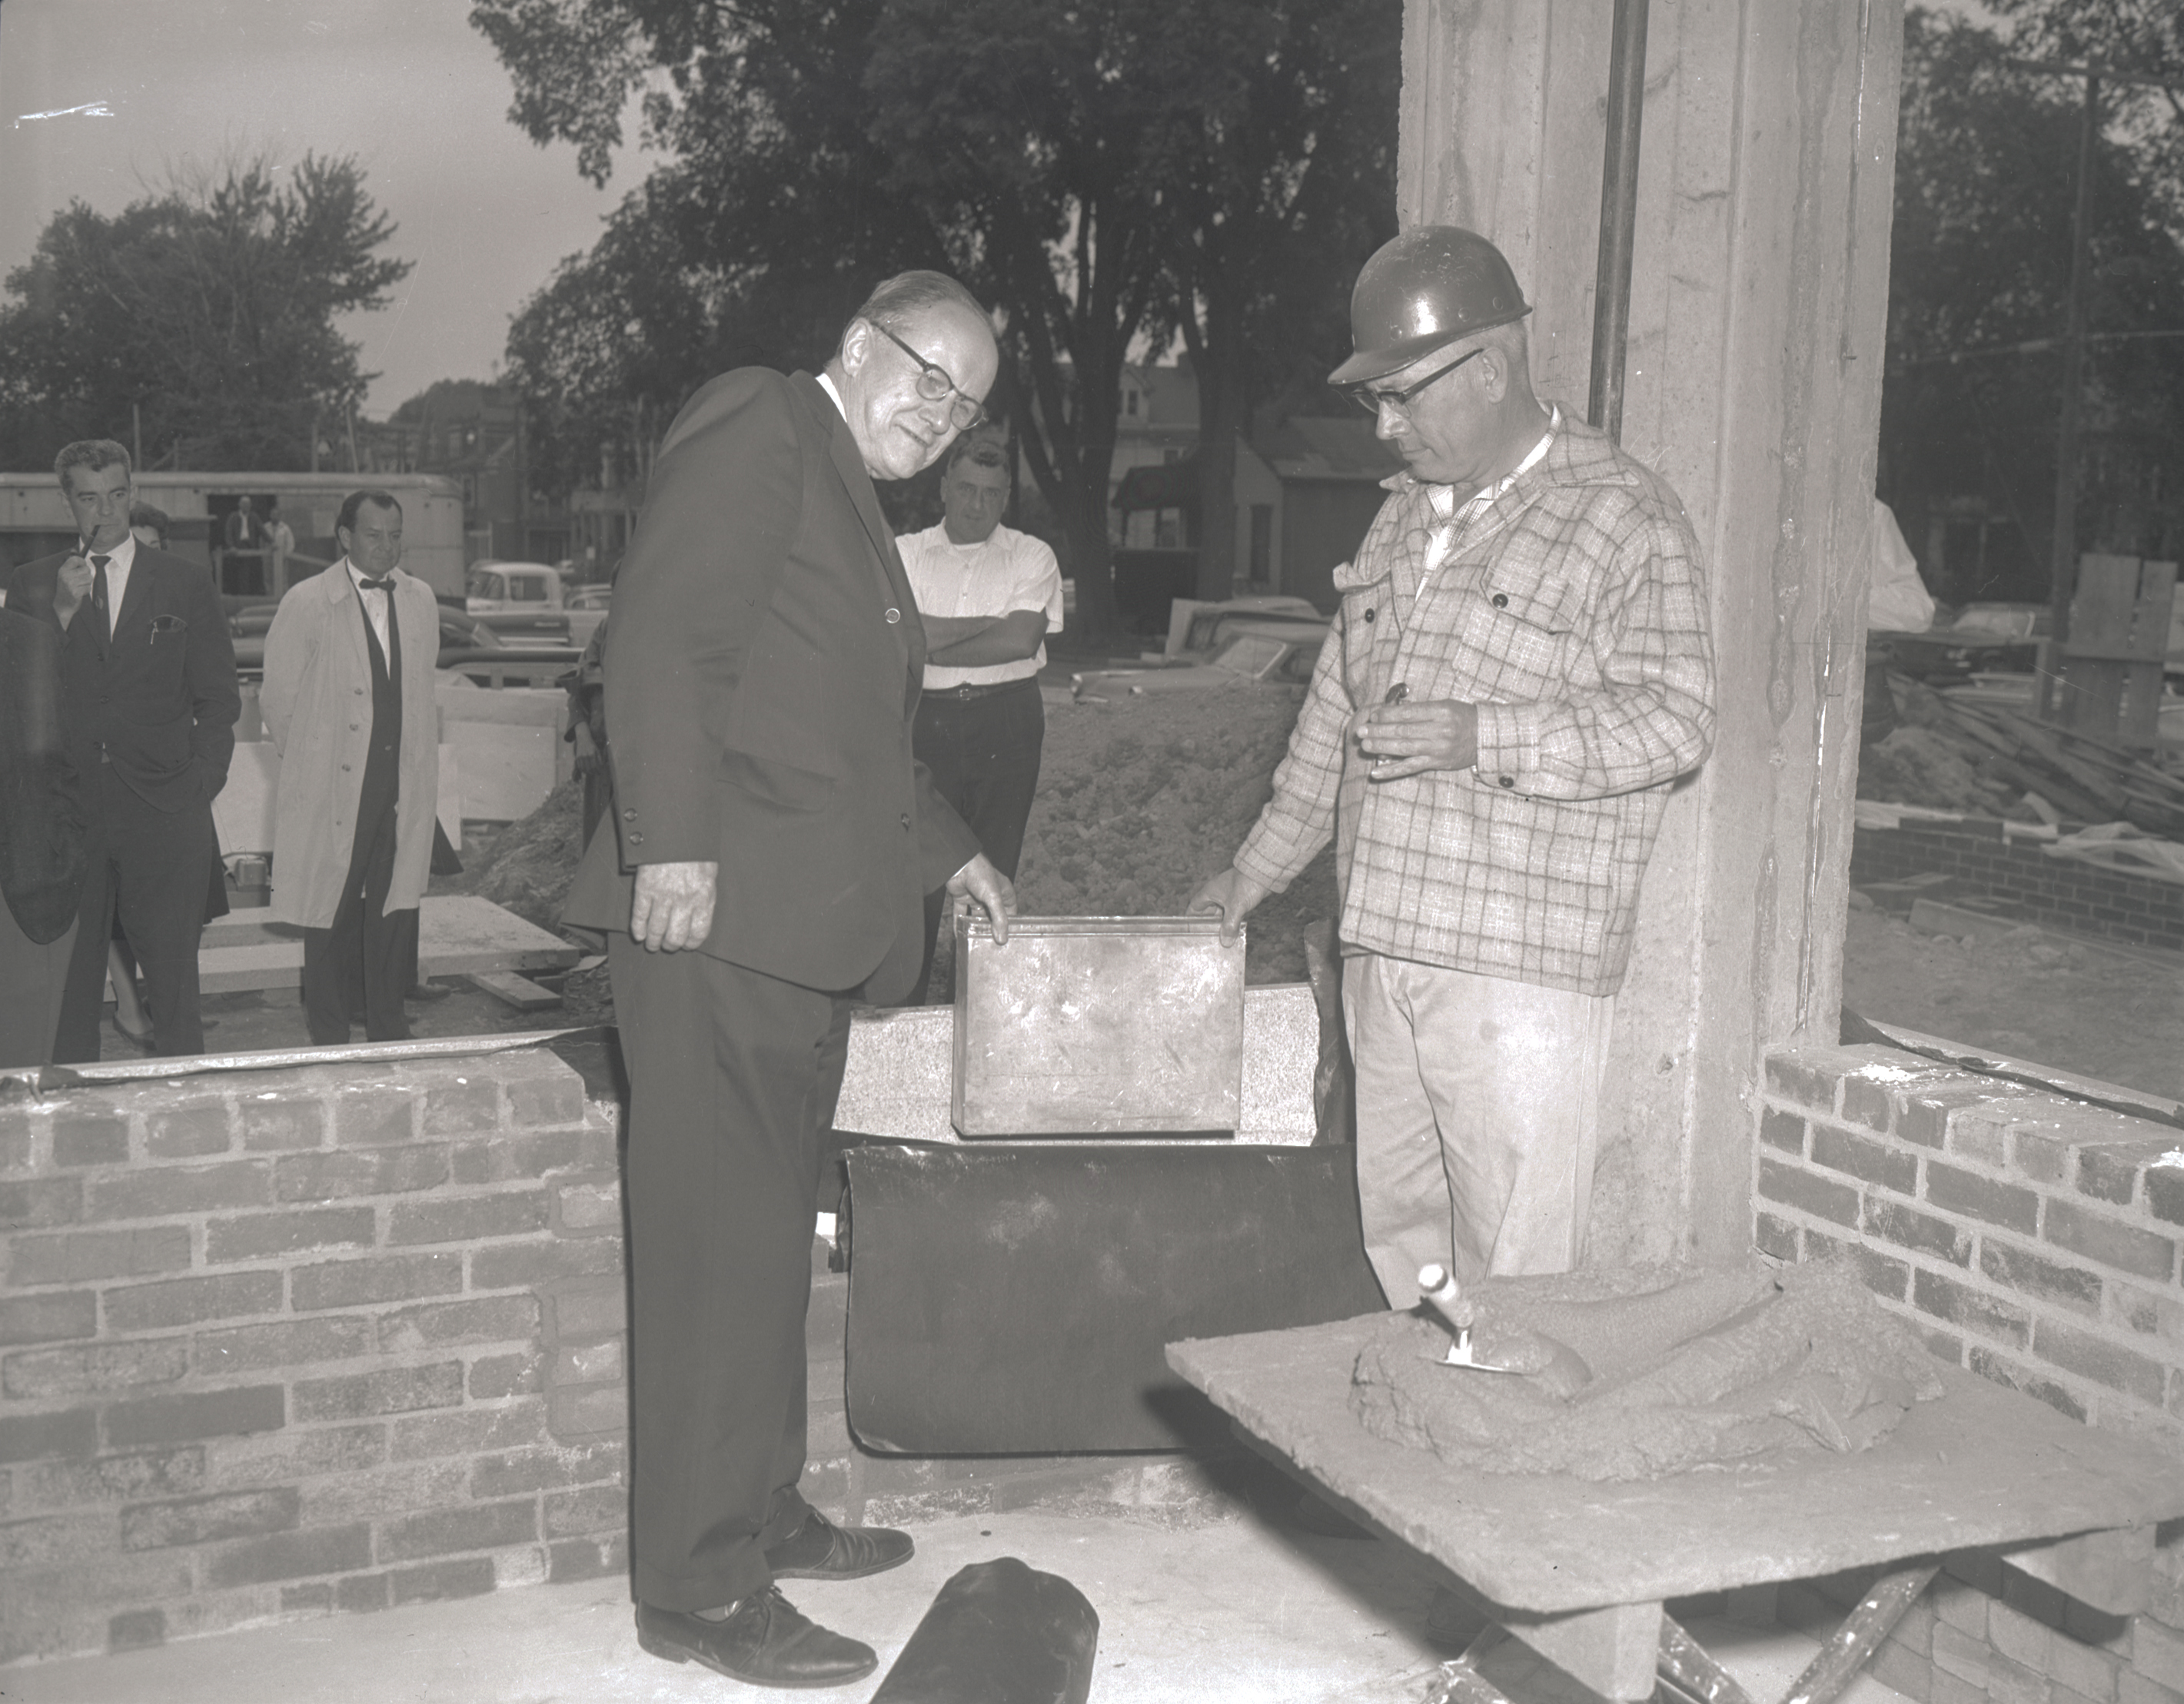 Upstate President Carlyle Jacobsen, PhD (1902-1974) and an unidentified man place a time capsule in the cornerstone of Upstate‘s downtown campus hospital, 1963.